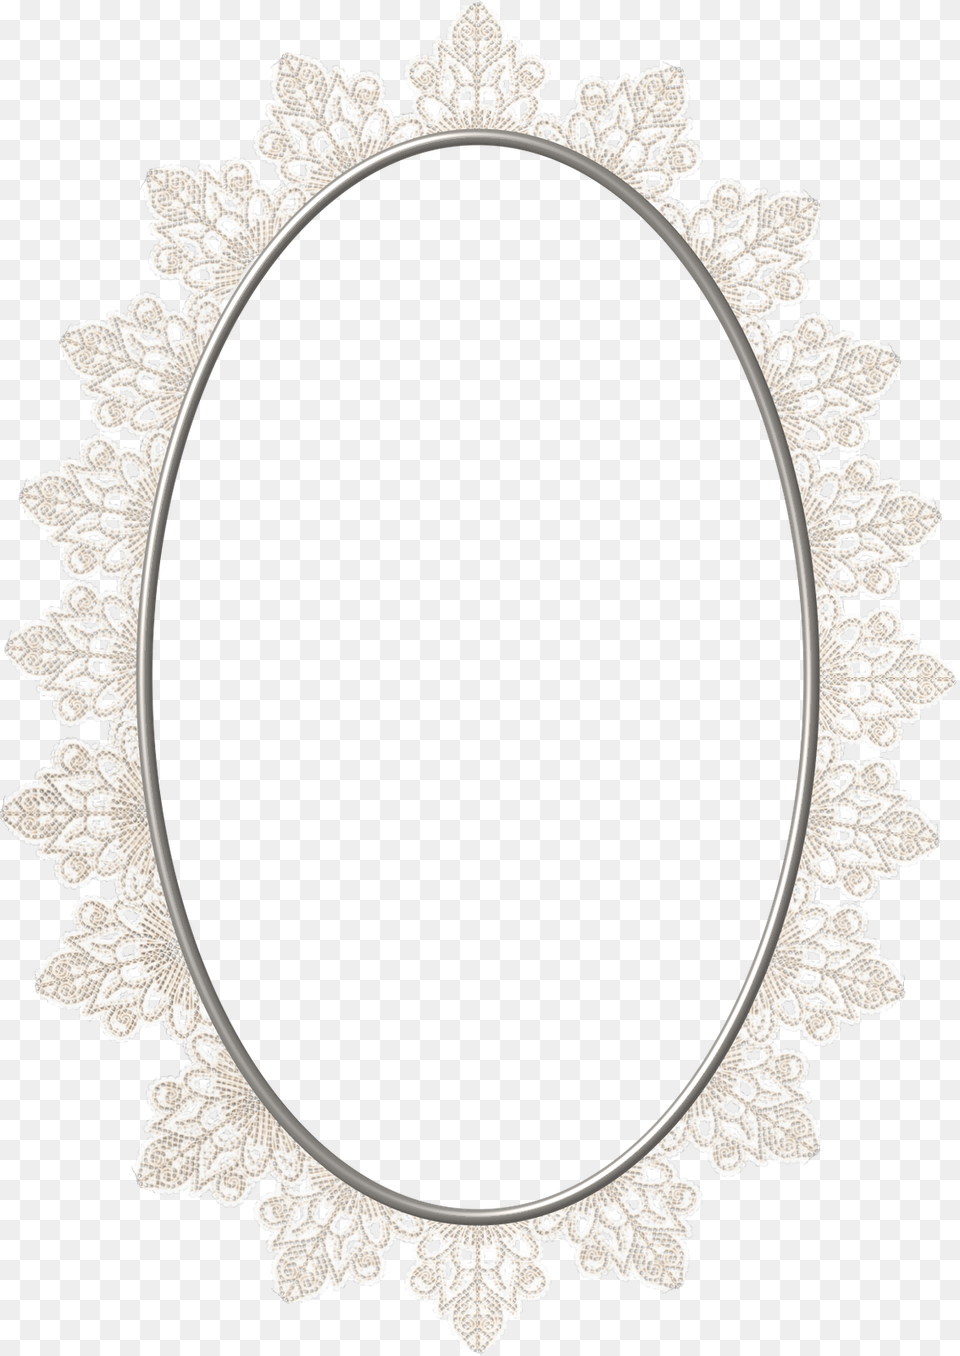 Pin By Eva Fabian On My Style Circle, Oval, Photography Free Transparent Png